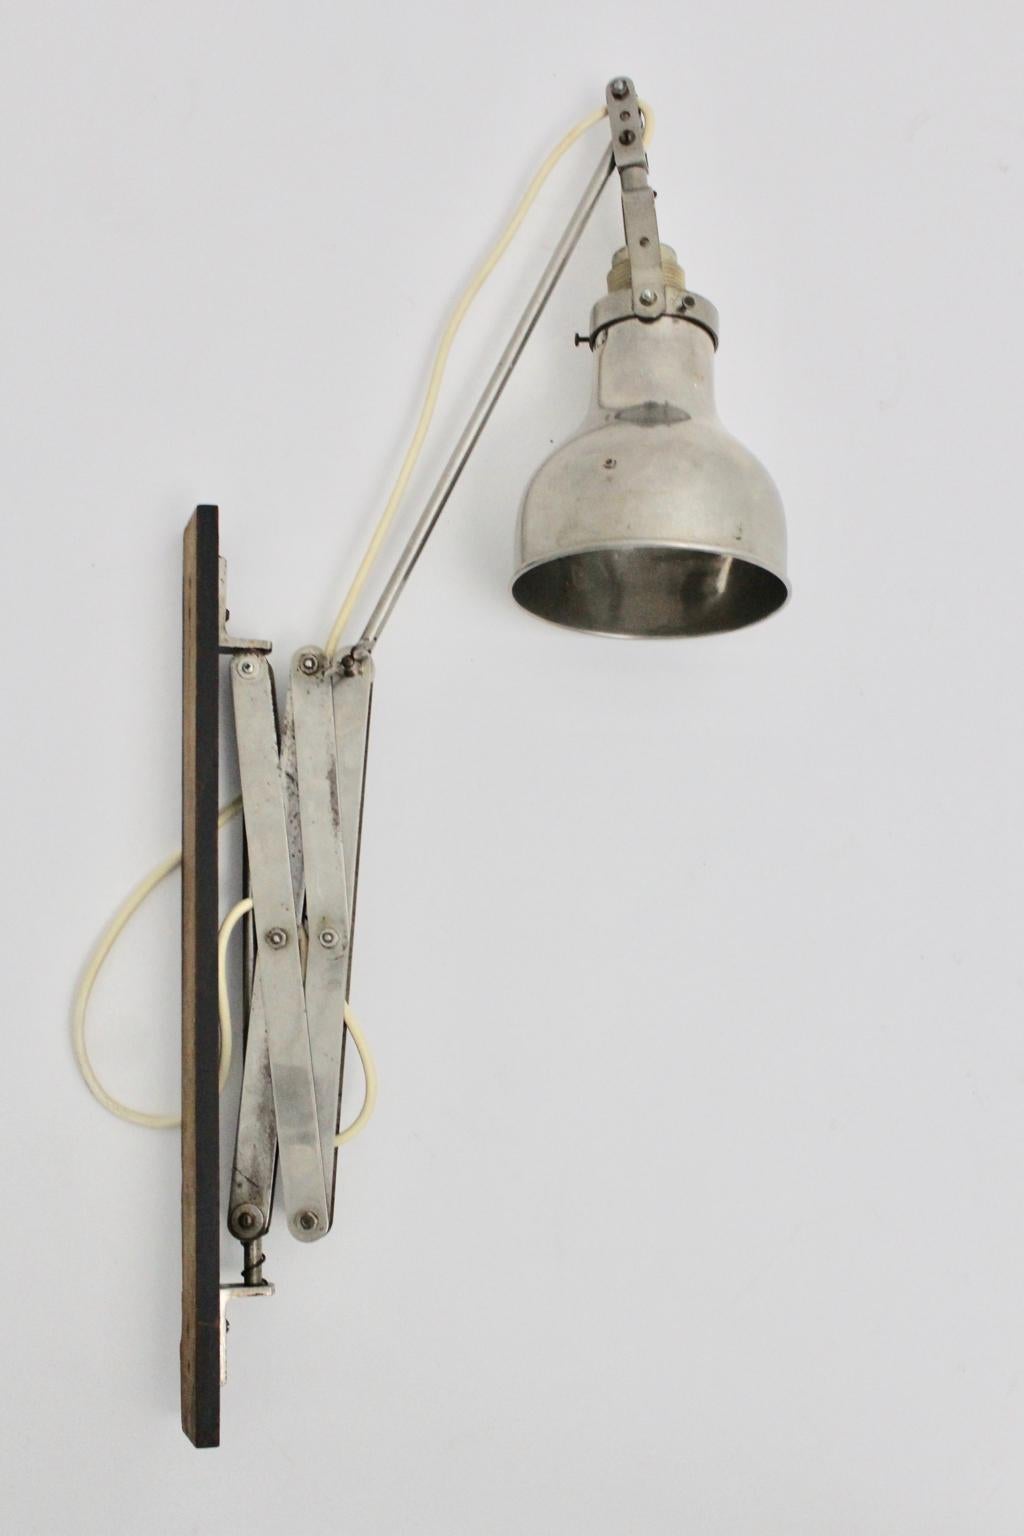 This wonderful original wall scissor Bauhaus lamp features a wall bracket made of beechwood - black lacquered.
Furthermore the wall sconce was made of metal and nickel-plated metal.
The condition is very good with signs of age and use and shows